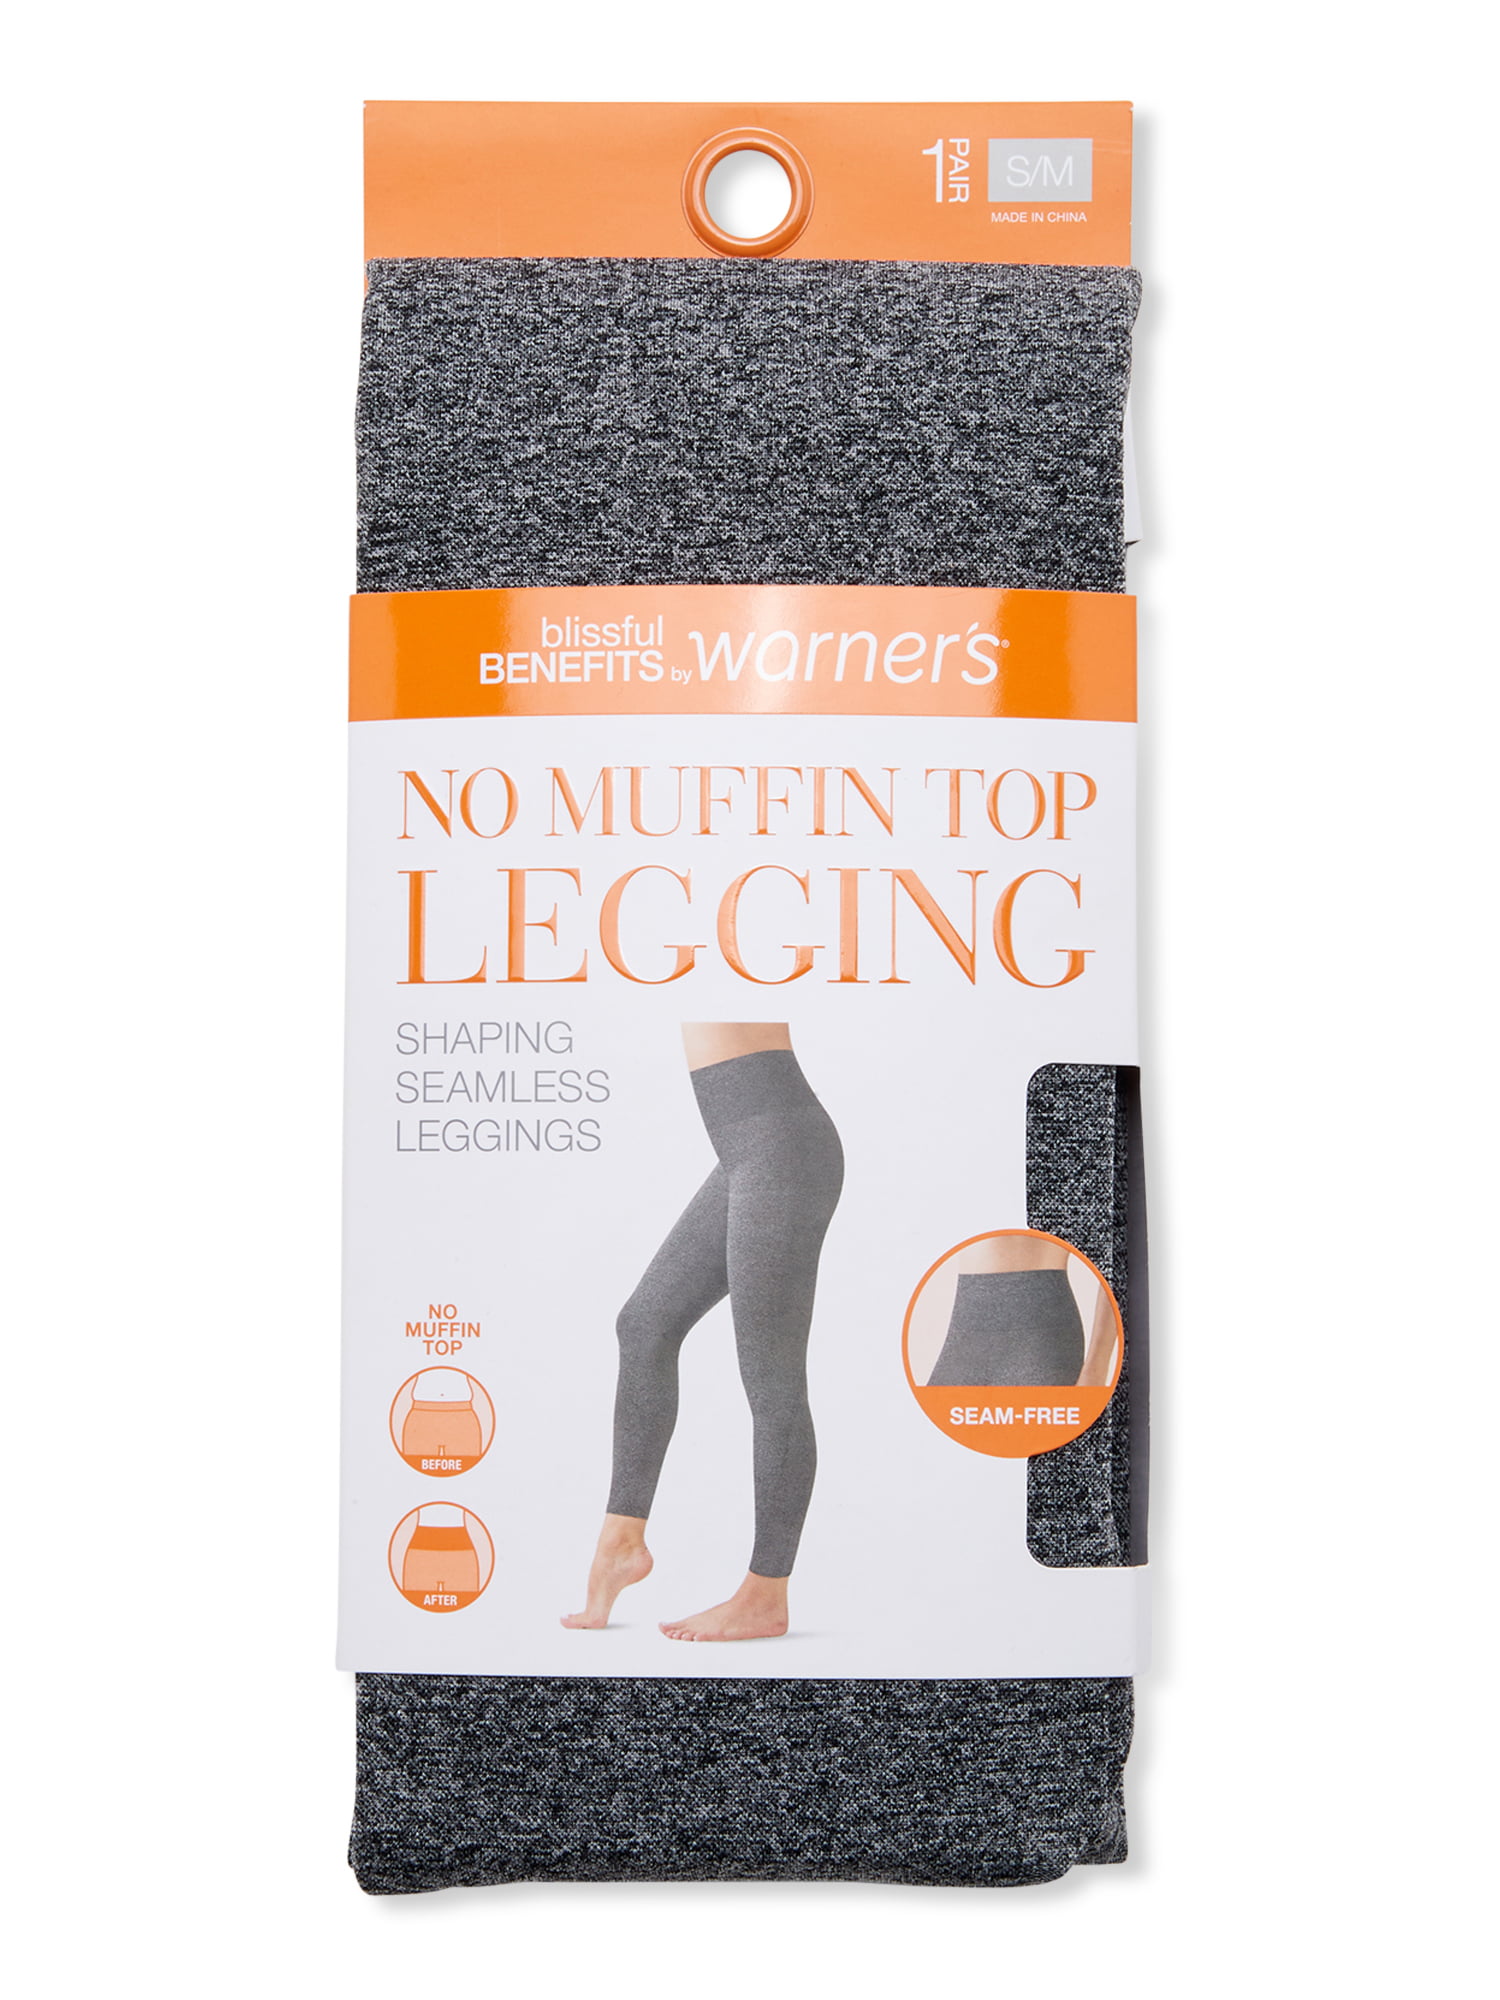 We Tested (and Found) the Best Leggings for Women Under $20